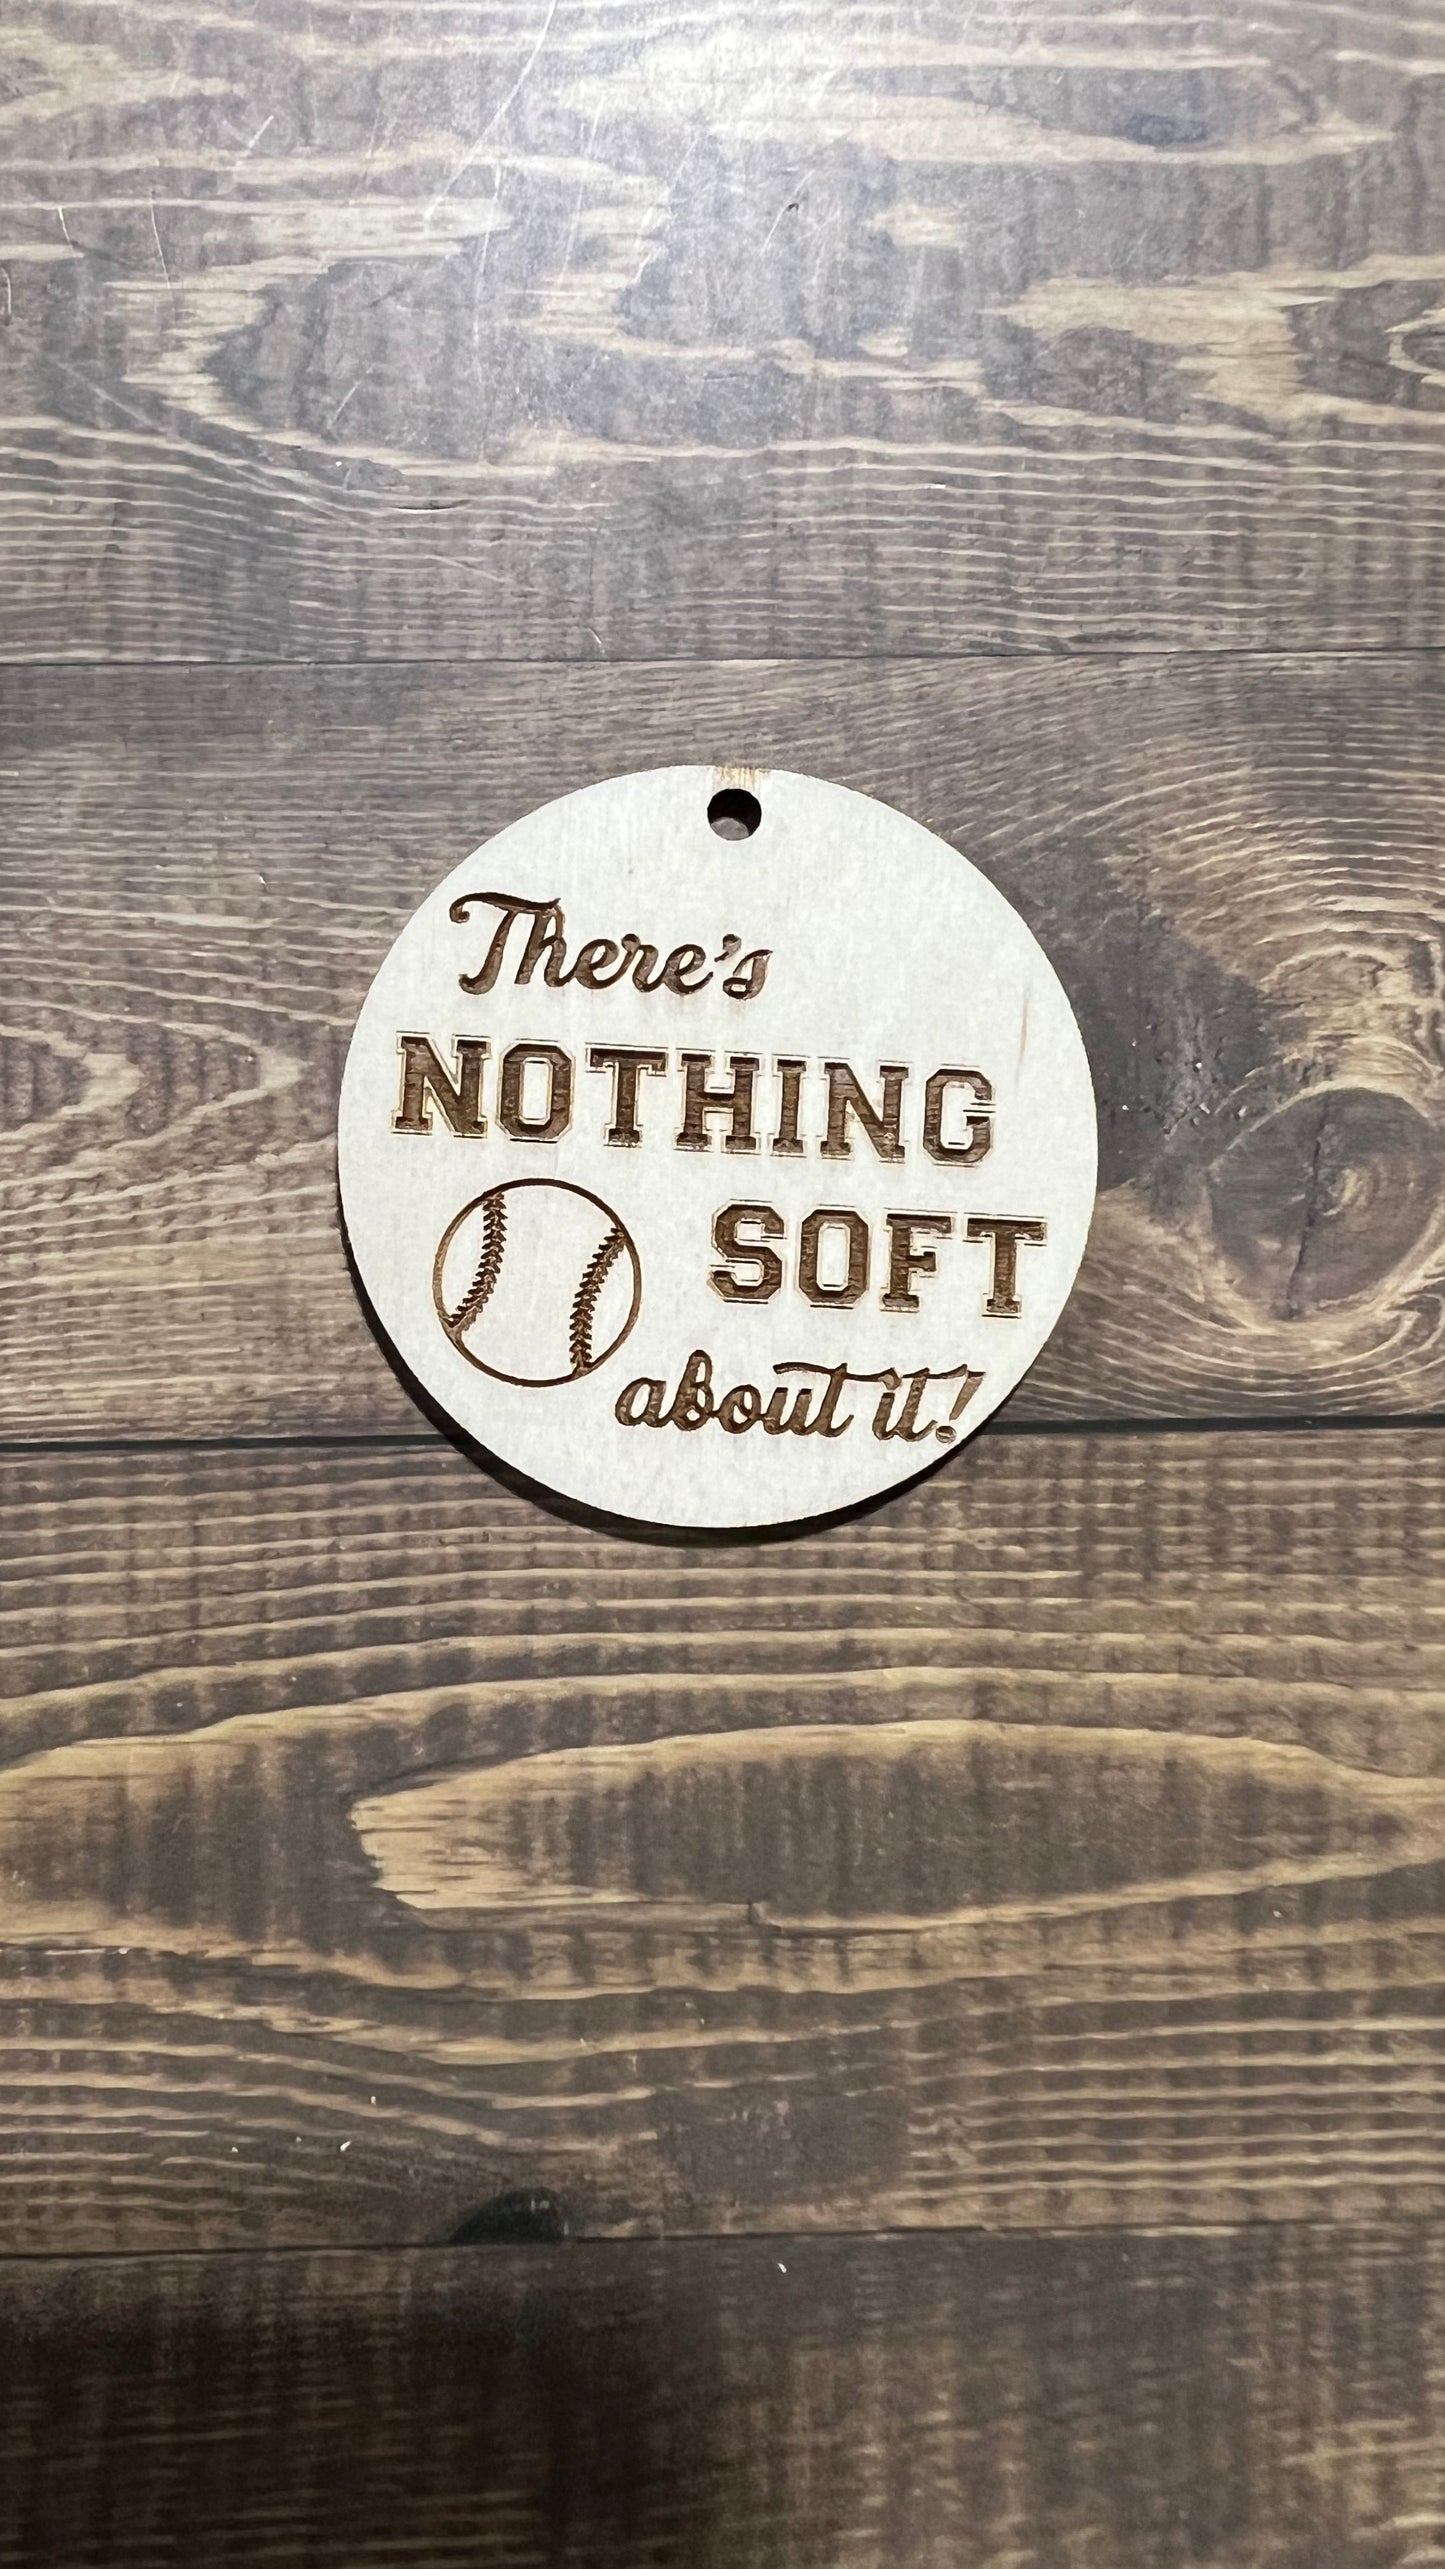 There's Nothing Soft About it Keychain,  Baseball Keychains